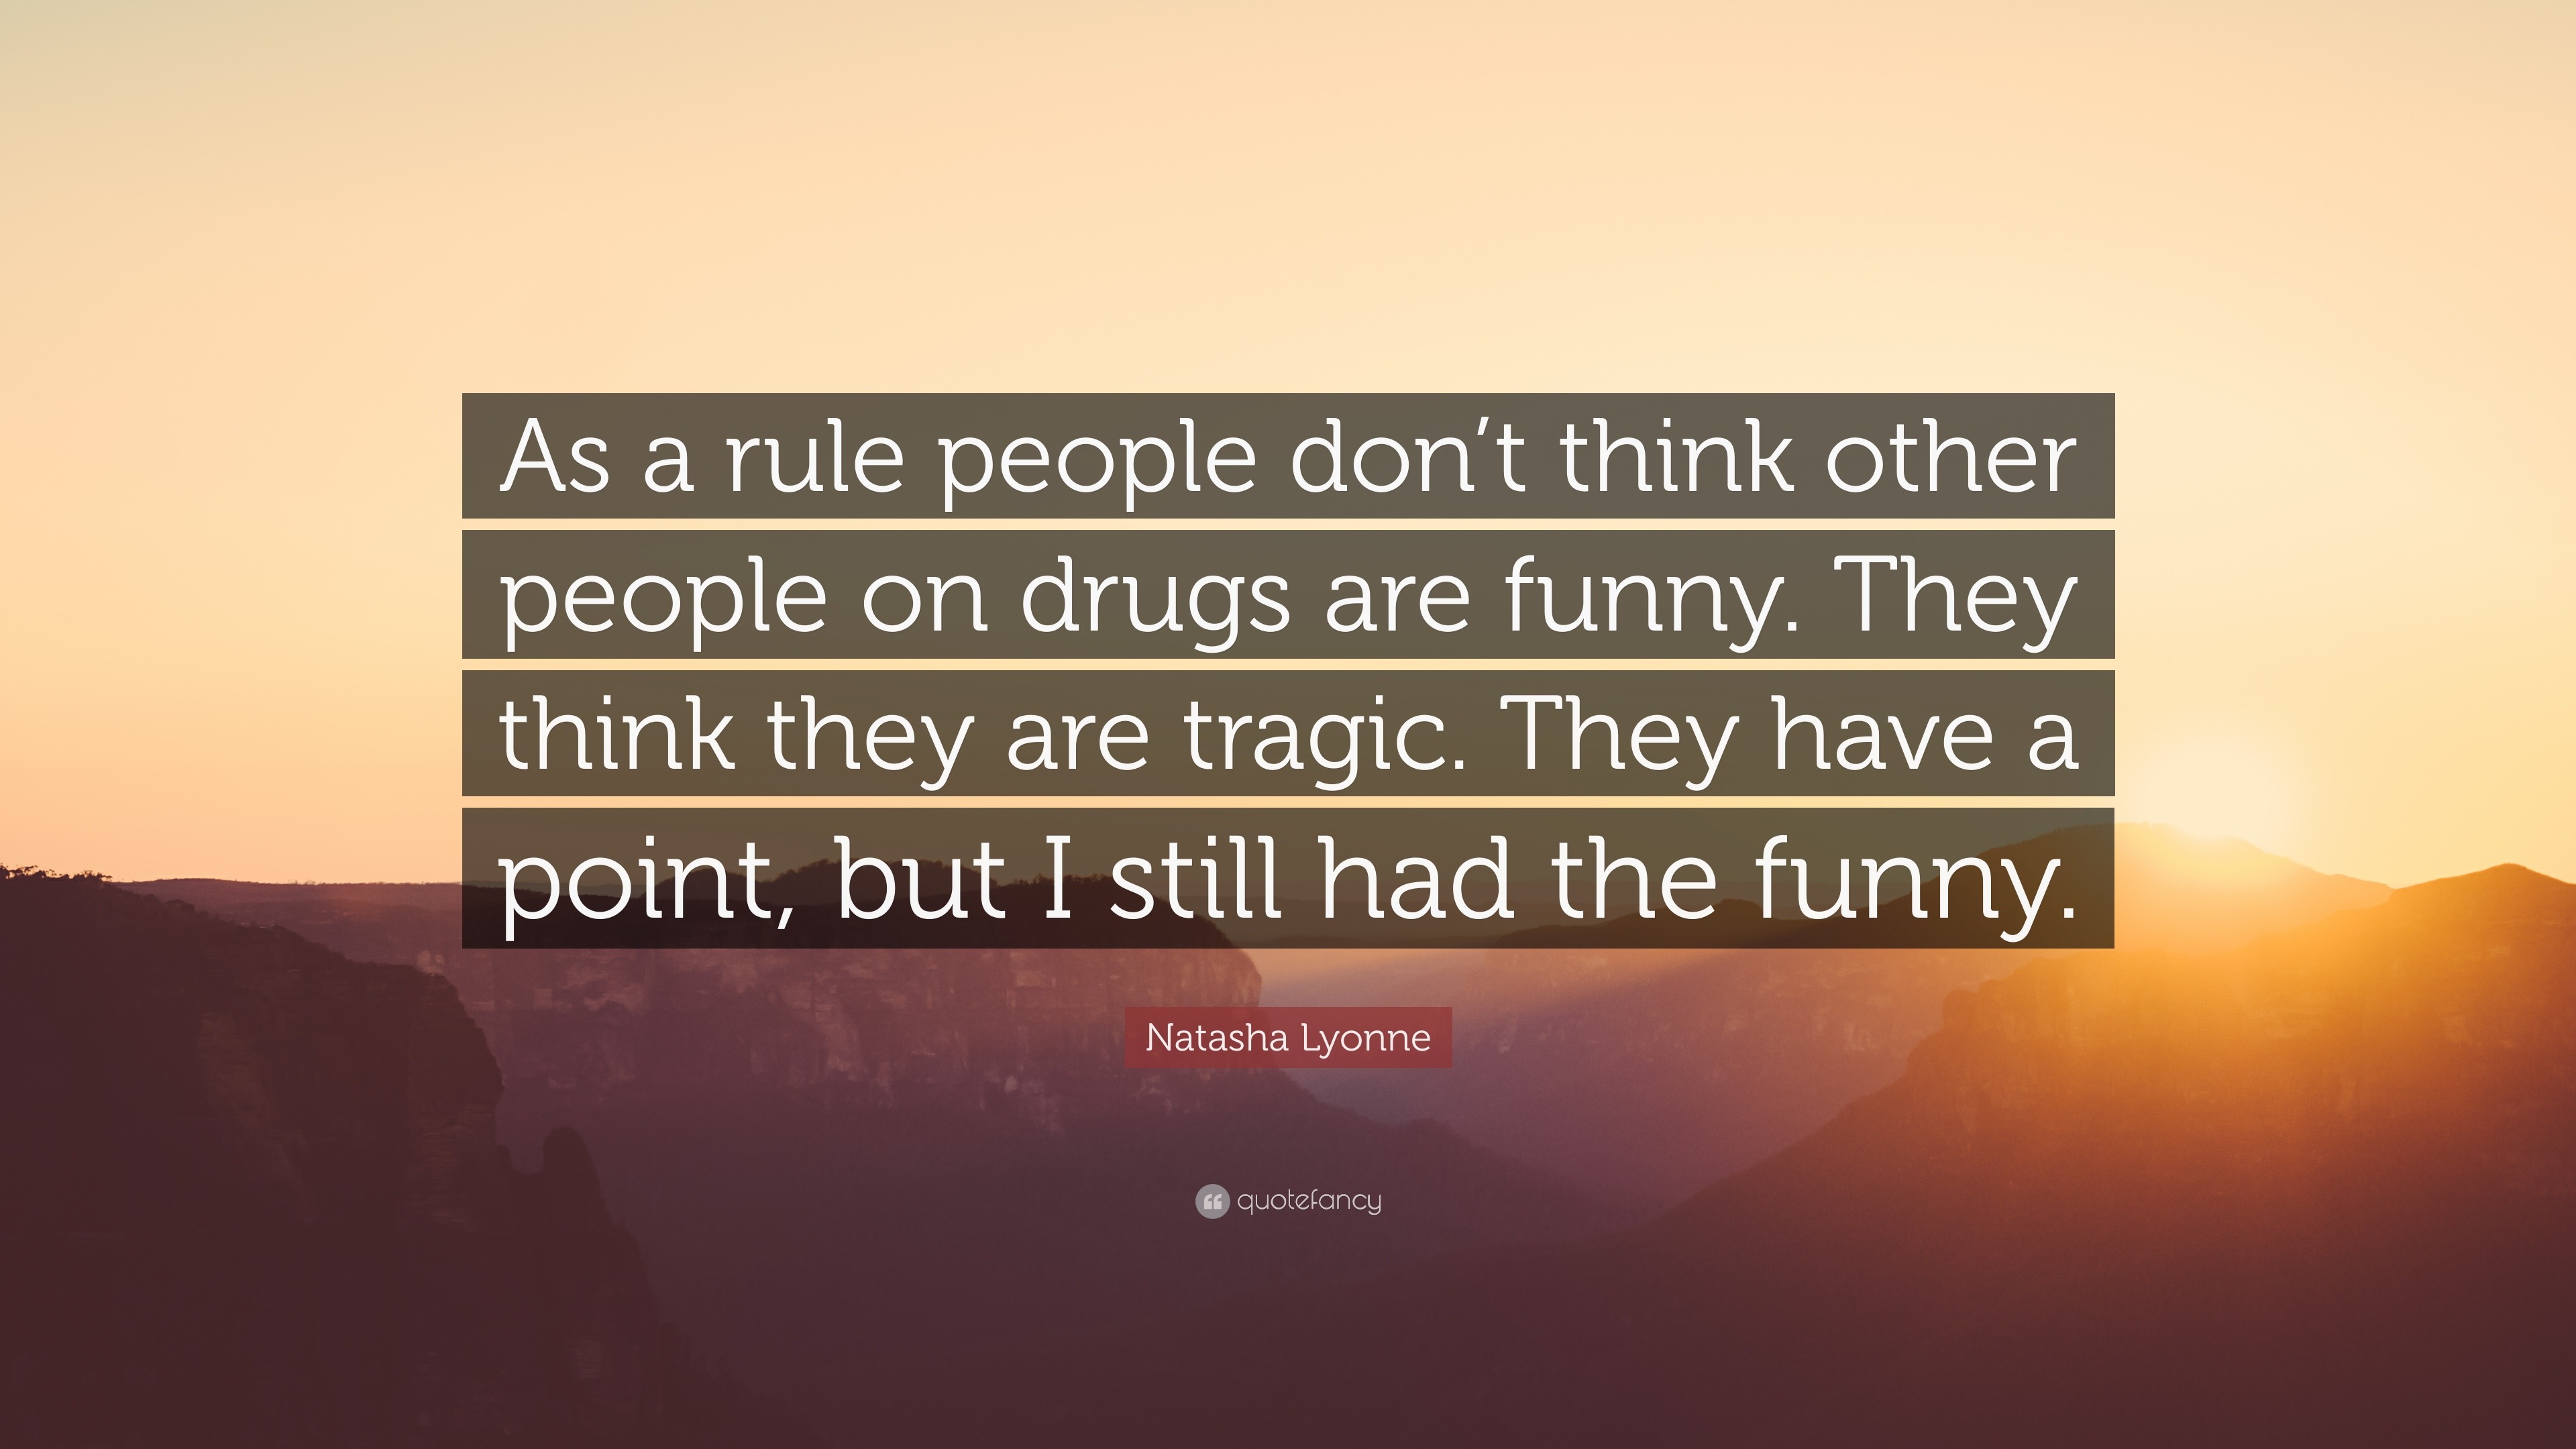 Natasha Lyonne Quote: “As a rule people don't think other people on drugs  are funny. They think they are tragic. They have a point, but I still...”